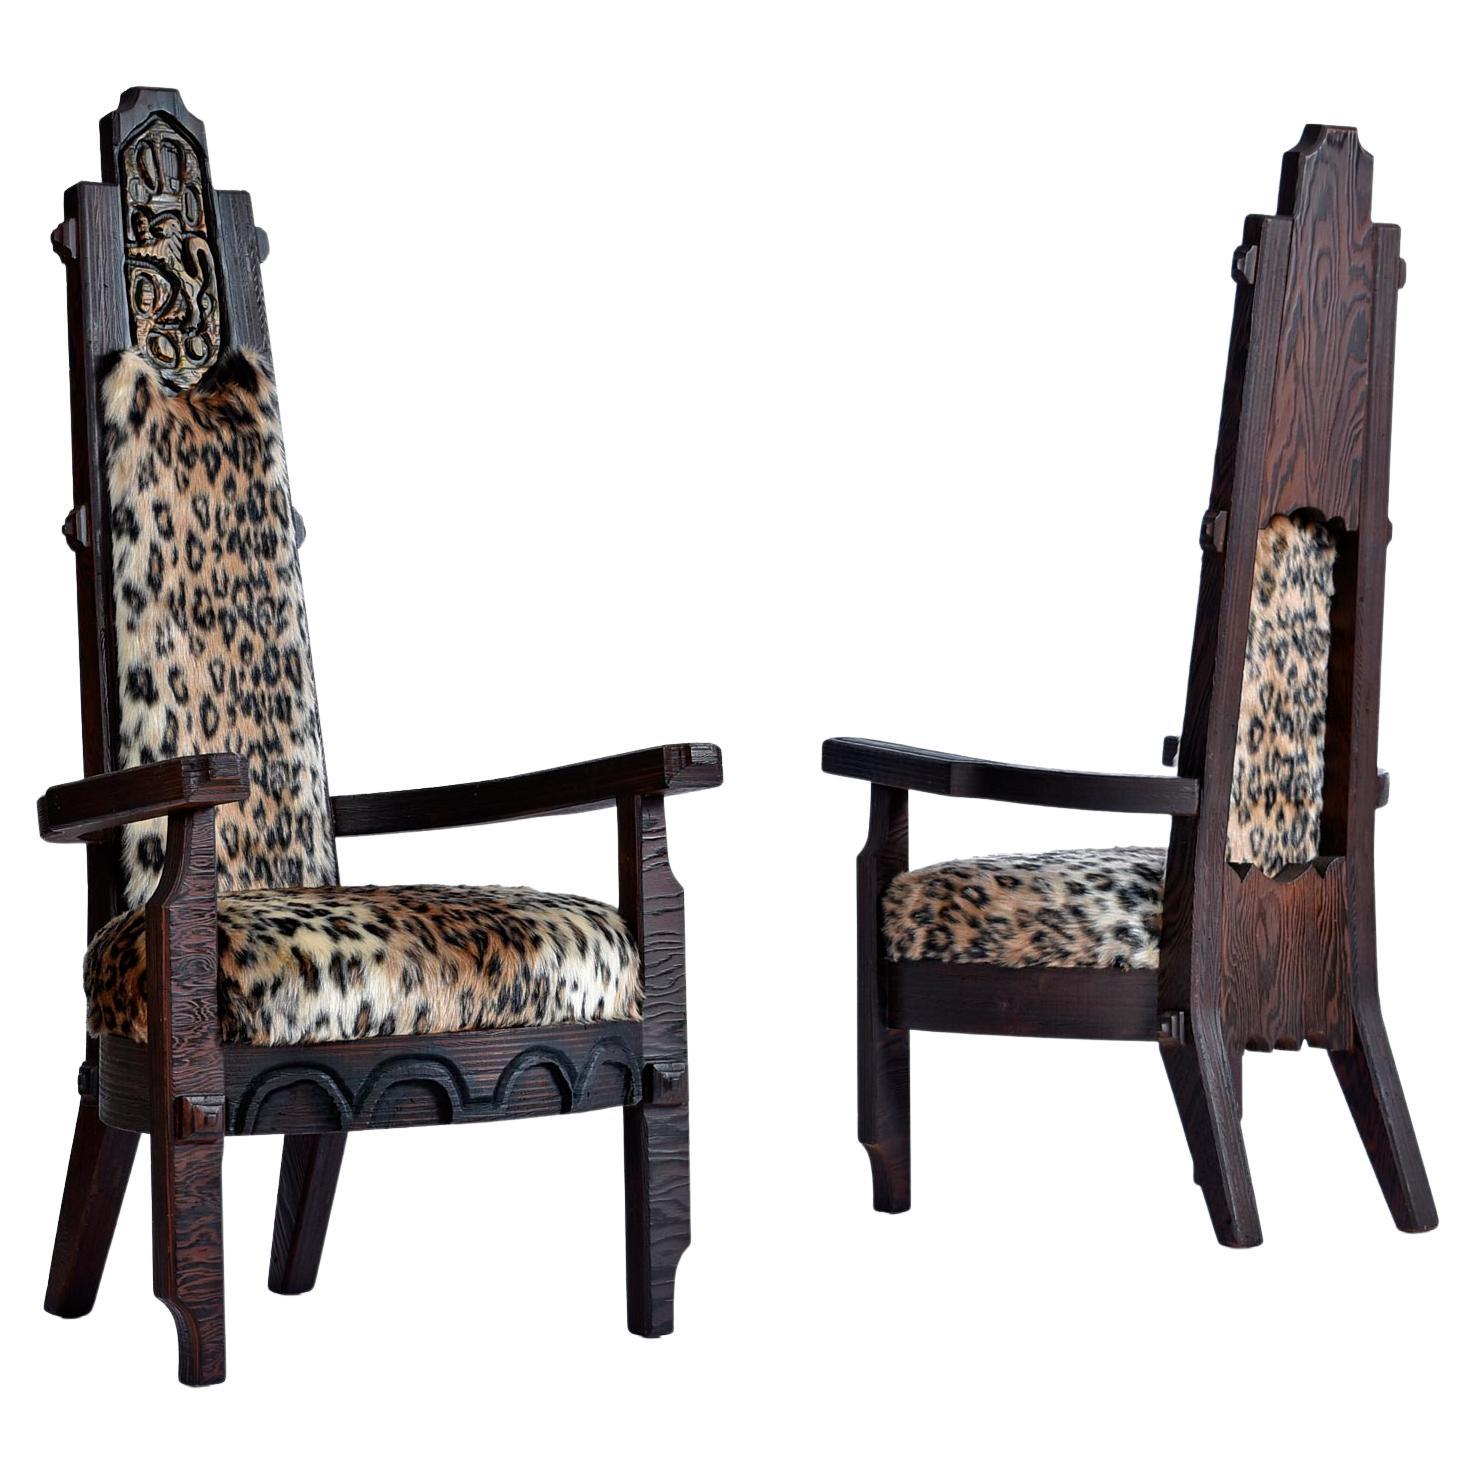 Take a walk on the wild side, or maybe just have a seat there with scepter in hand. Each thrown has been recovered in high-quality, cruelty free, faux-fur that very much resembles the look and feel of leopard fur. Each high back is adorned with a